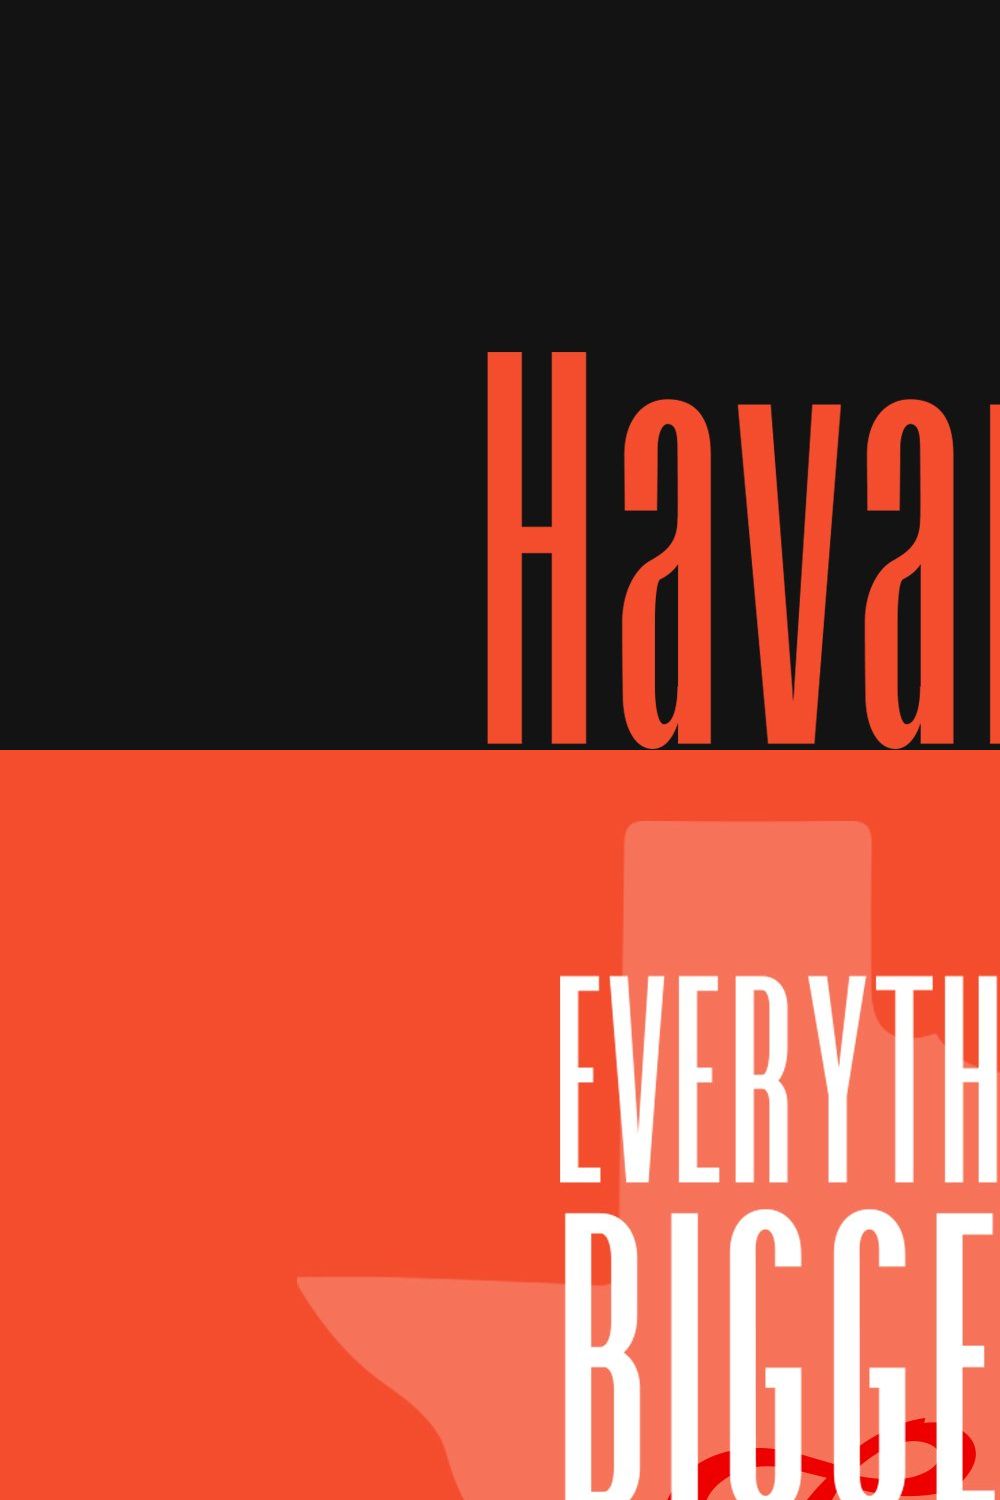 Havanna - Tall Sans in 3 weights pinterest preview image.